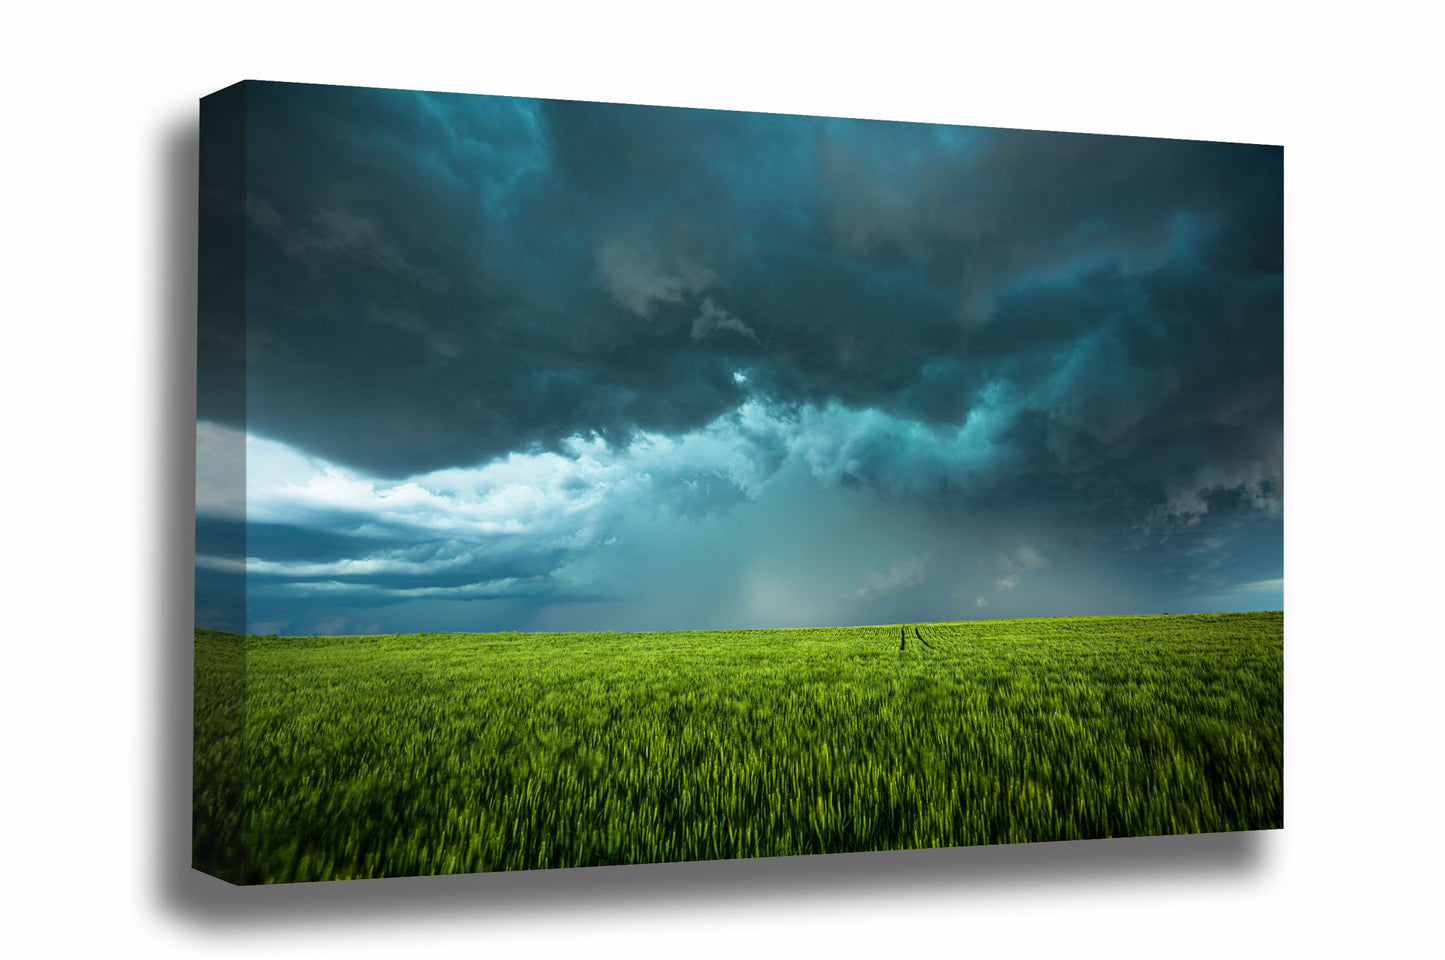 Storm canvas wall art of a teal hued thunderstorm over lush green wheat on a stormy spring day in Kansas by Sean Ramsey of Southern Plains Photography.